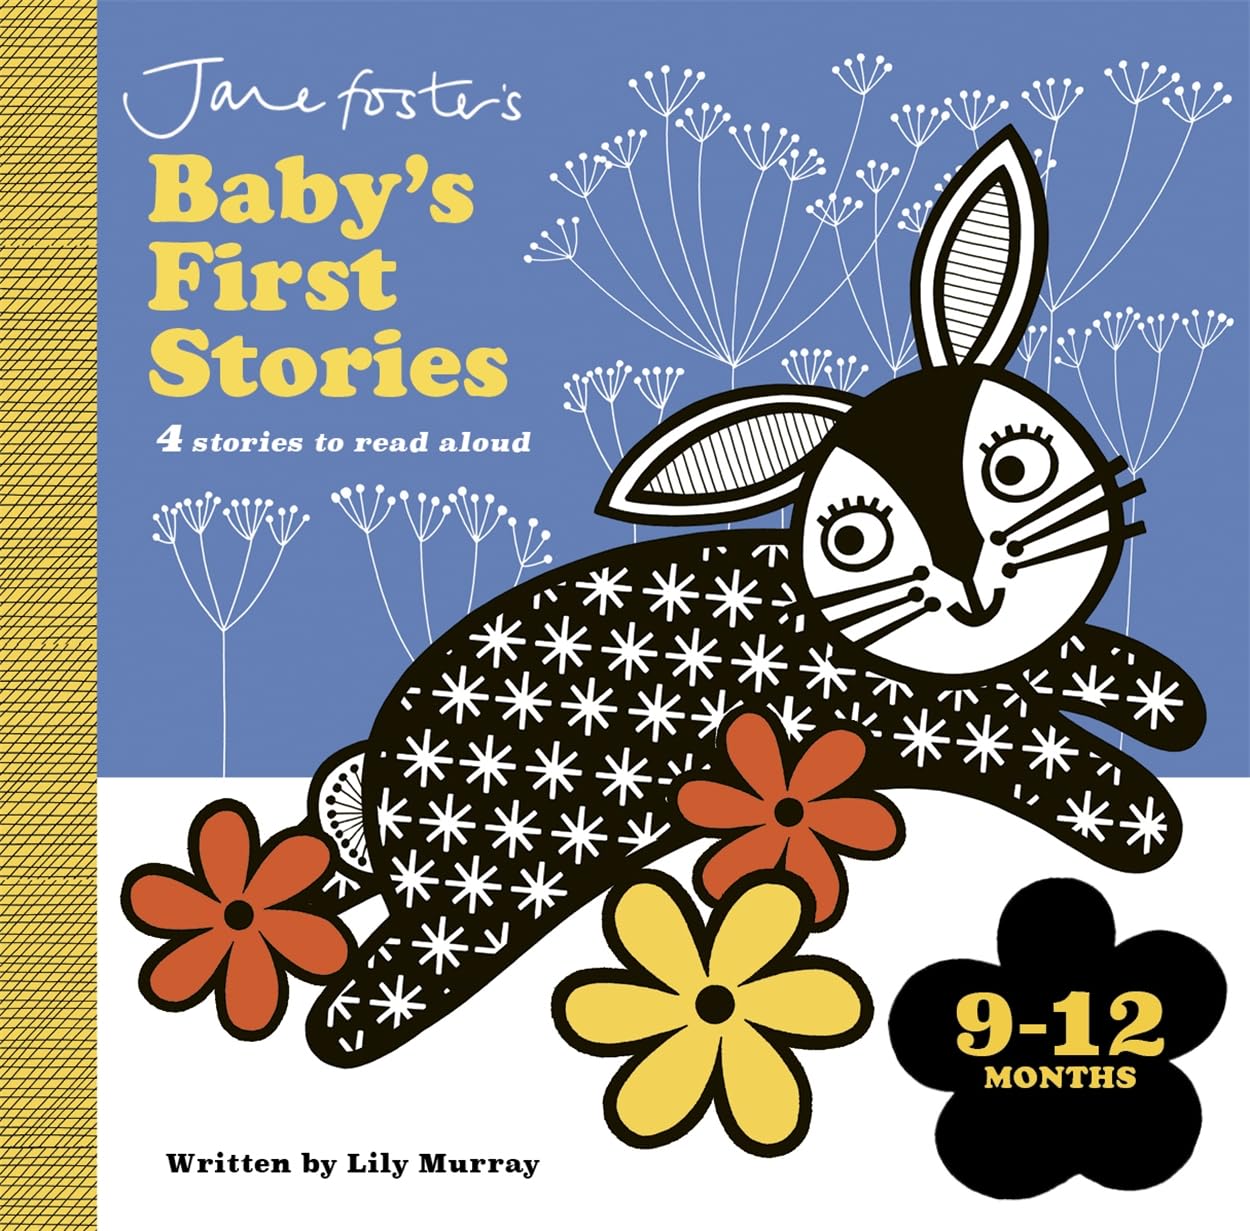 Jane Foster's Baby's First Stories | Baby Book - Lifestory